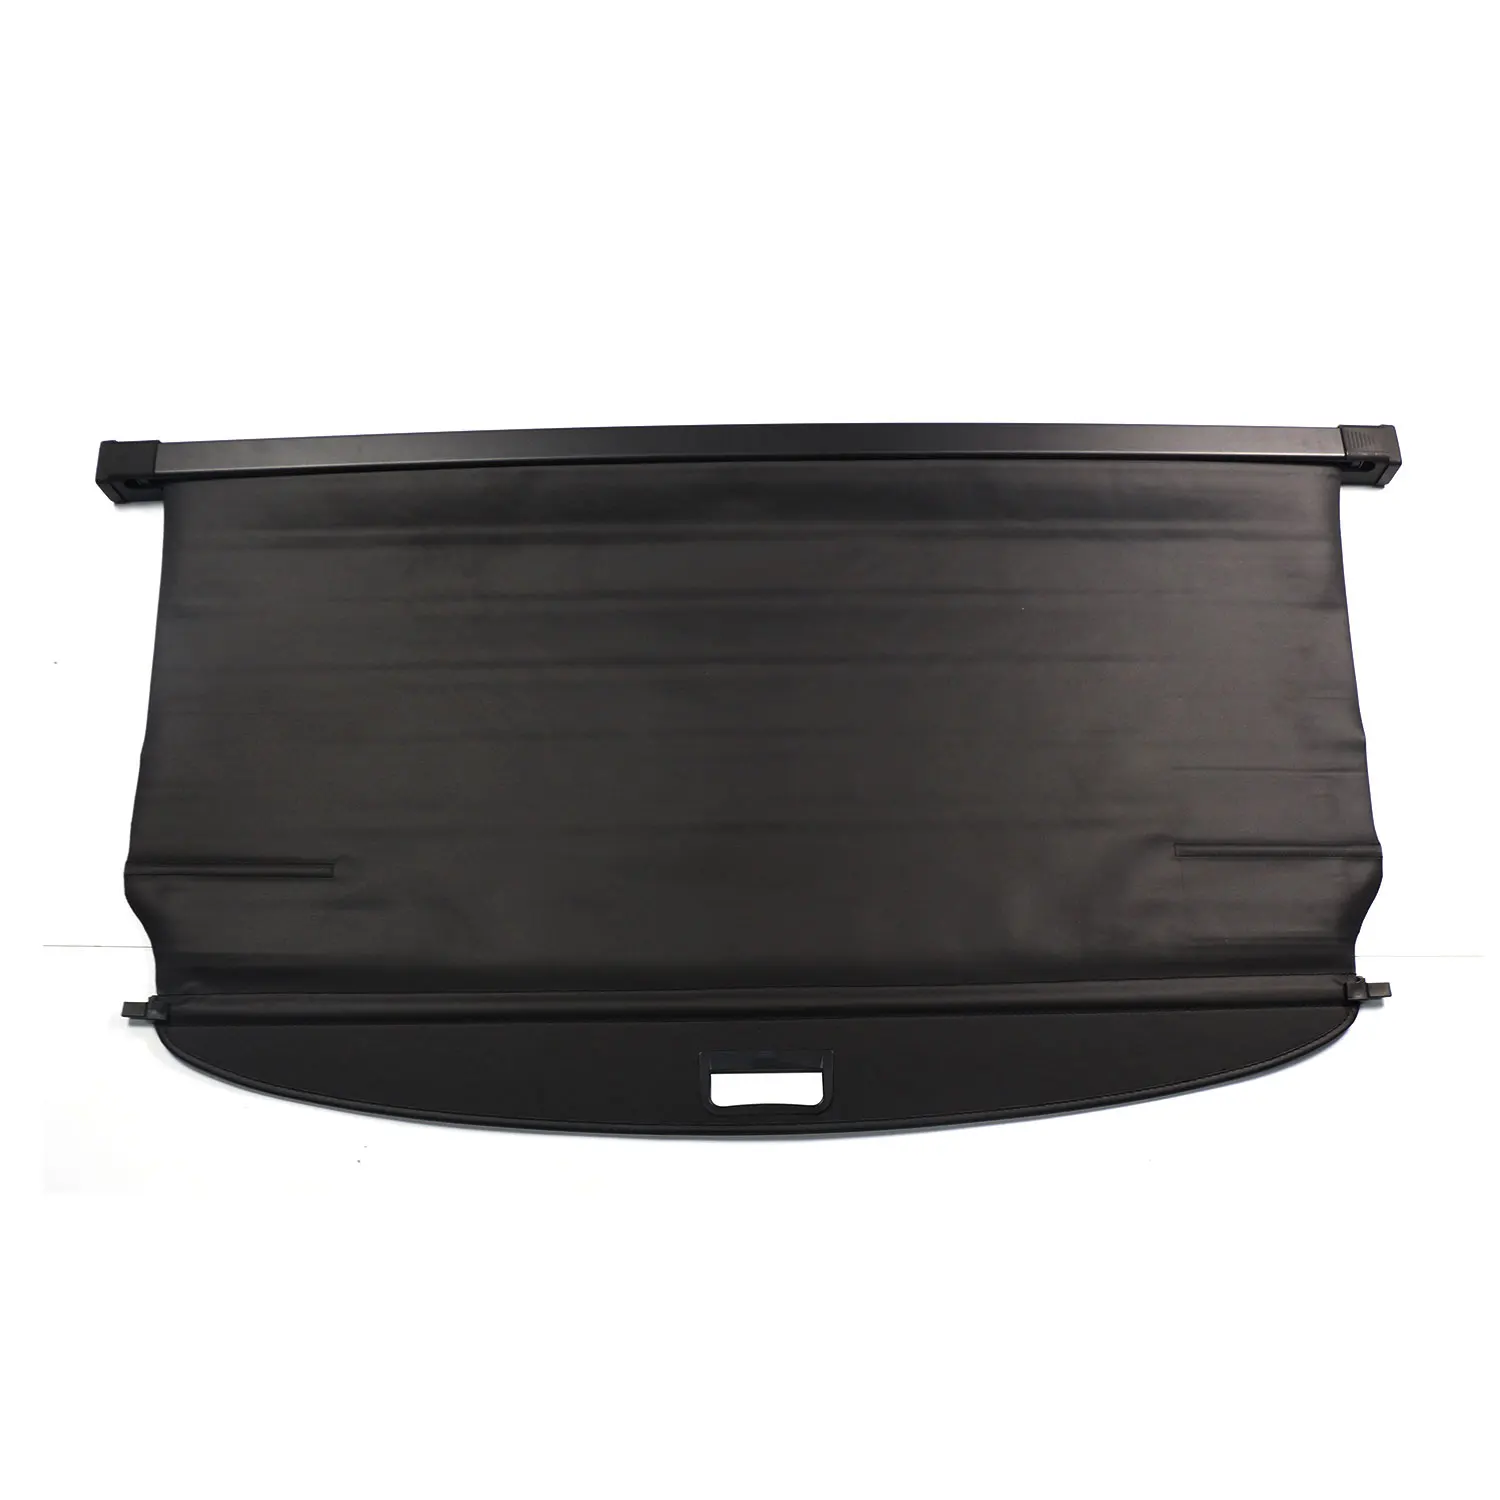 OEM ODM  Parcel Shelf for Benz ML 12-15  trunk cover Car Accessories and Parts Cargo Cover car accessories car sun visor mirror makeup sun shade cosmetic mirror cover for mercedes benz e cls class w211 w219 2118100310